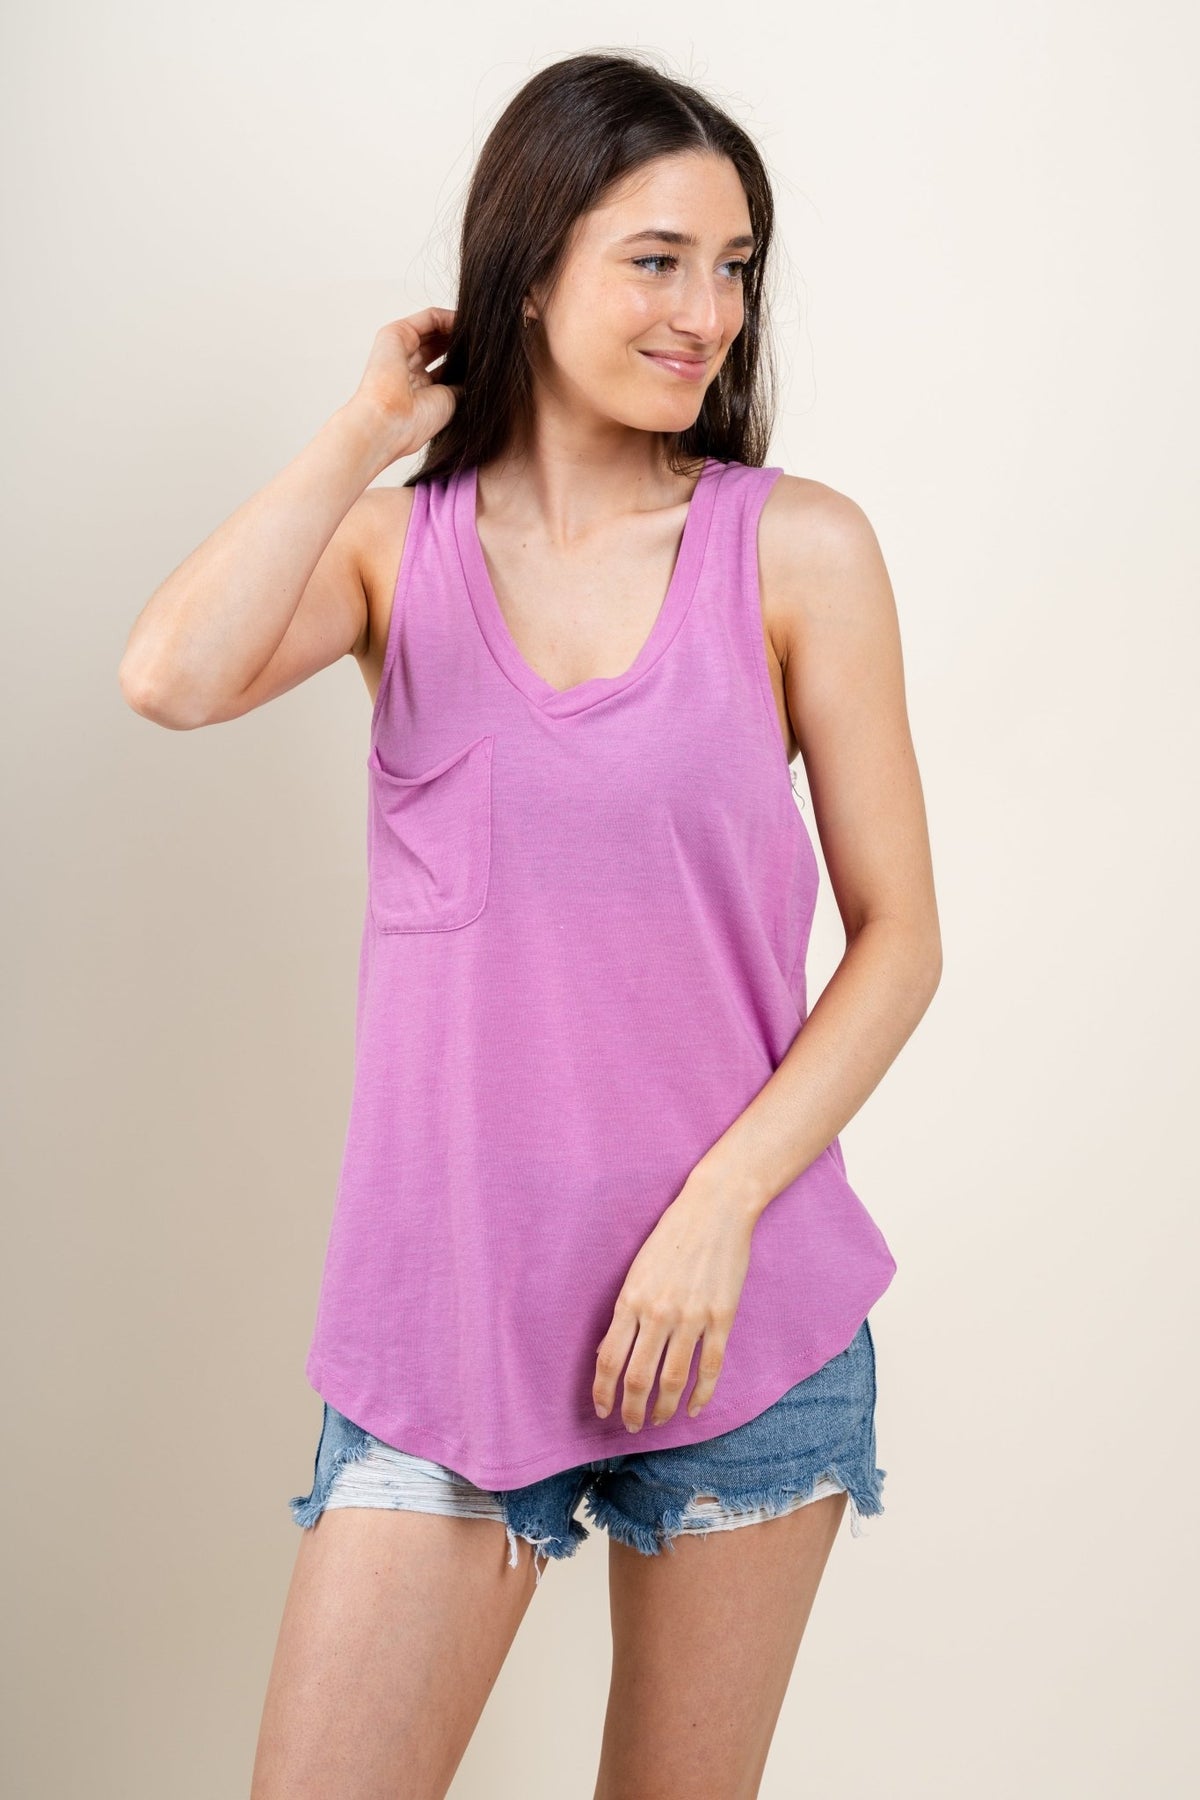 Z Supply pocket racer tank top wild dahlia - Z Supply Tank Top - Z Supply Tops, Dresses, Tanks, Tees, Cardigans, Joggers and Loungewear at Lush Fashion Lounge